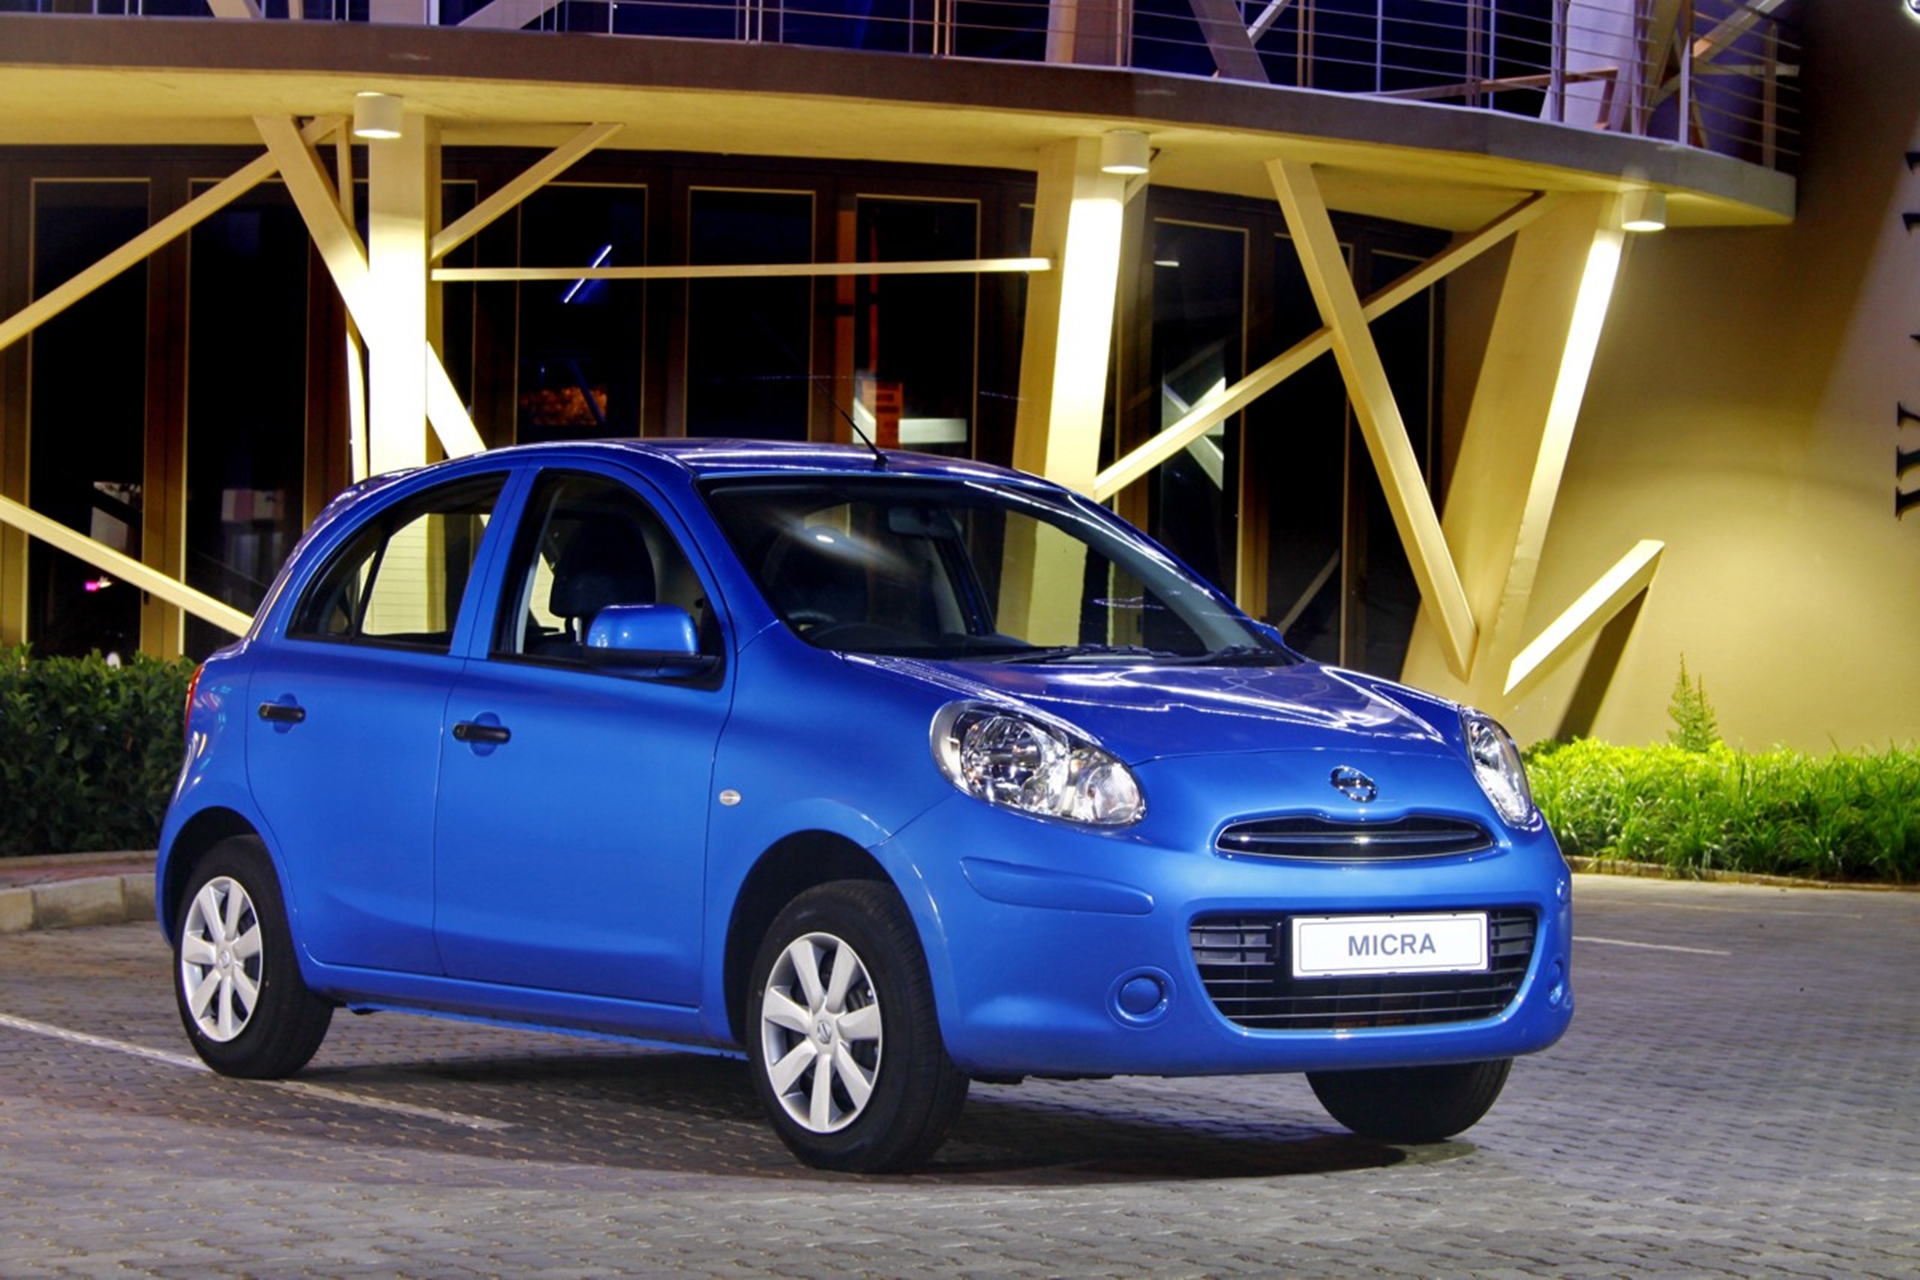 TOP MARKS FOR NISSAN MICRA IN 2012 KINSEY REPORT